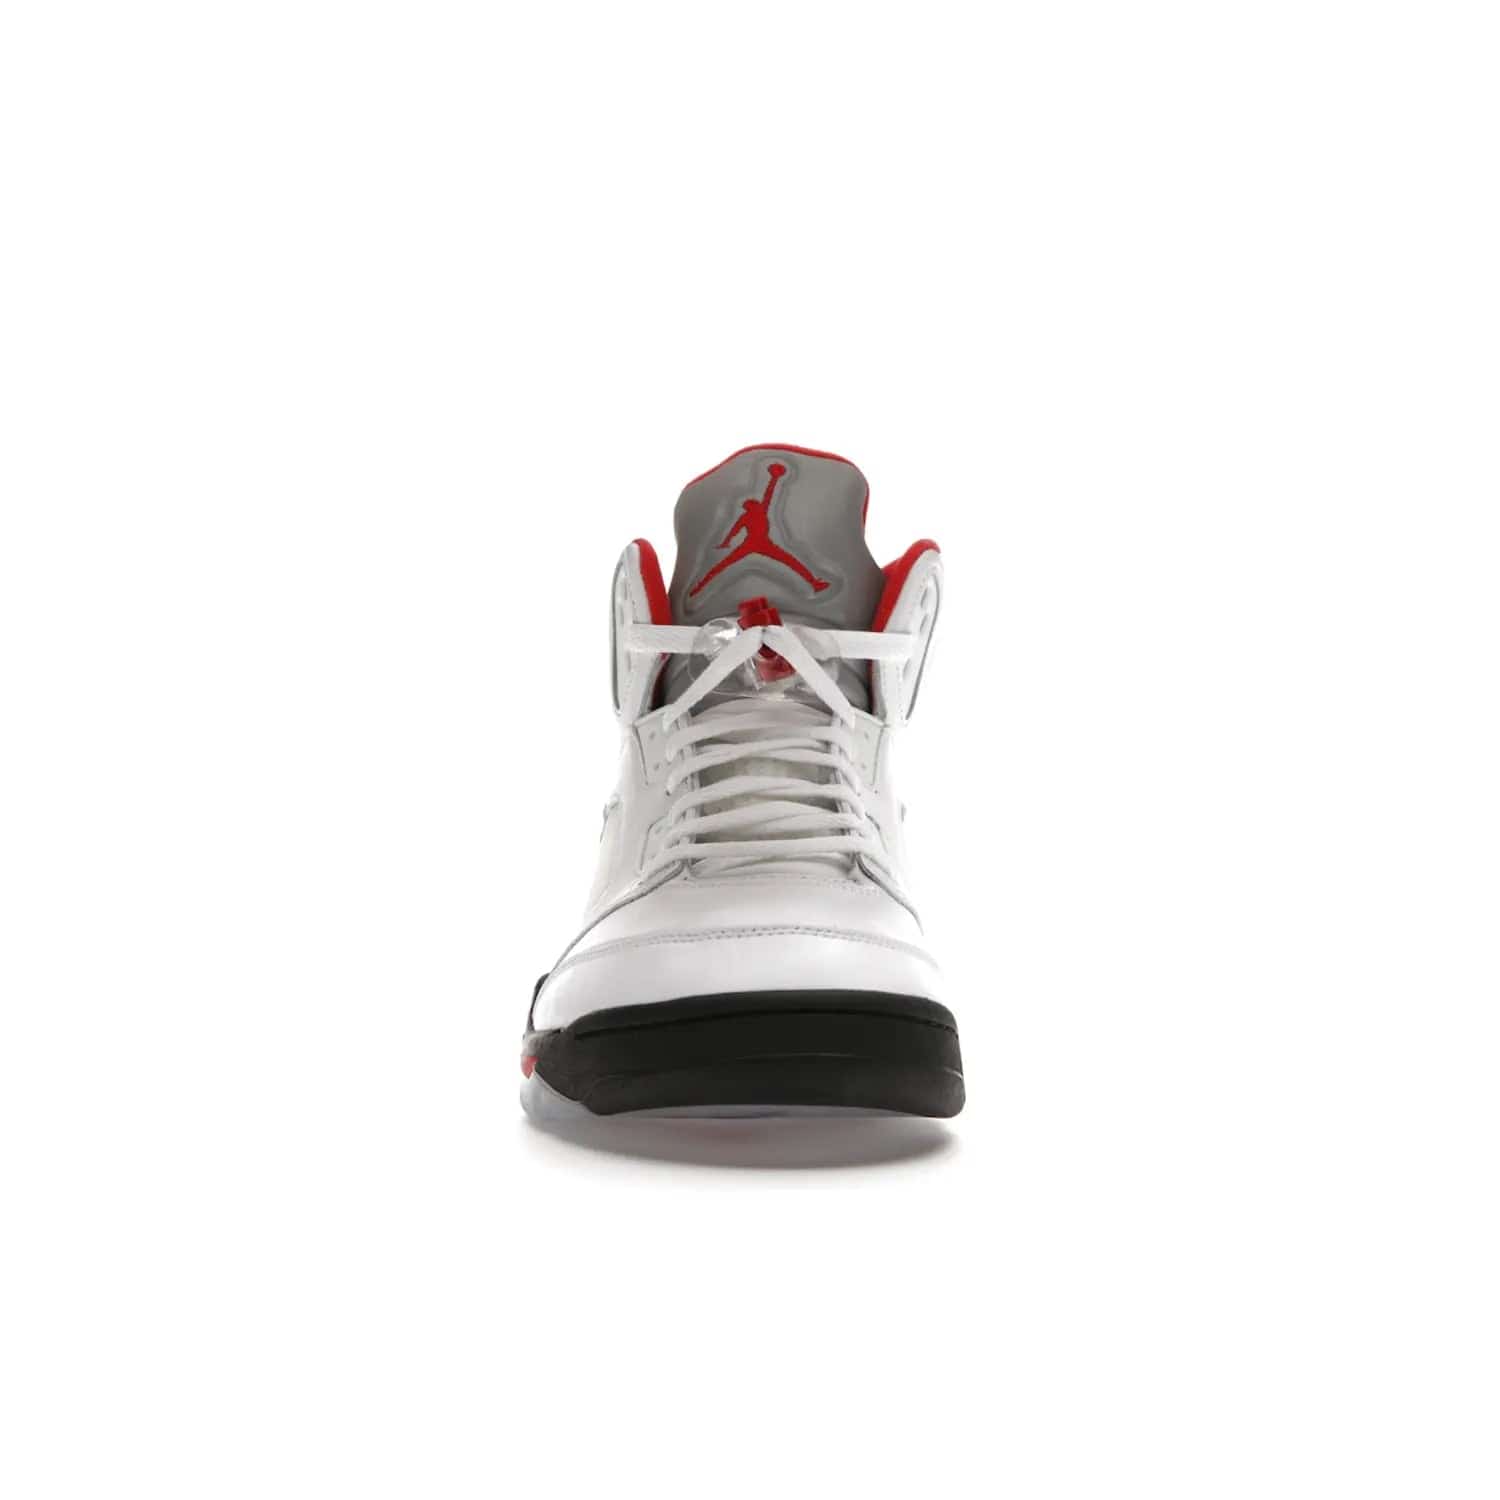 Jordan 5 Retro Fire Red Silver Tongue (2020) - Image 10 - Only at www.BallersClubKickz.com - Experience classic styling with the Jordan 5 Retro Fire Red Silver Tongue (2020). Features a white leather upper, 3M reflective tongue, midsole colorblocking, and an icy translucent outsole. Now available, upgrade your shoe collection today.